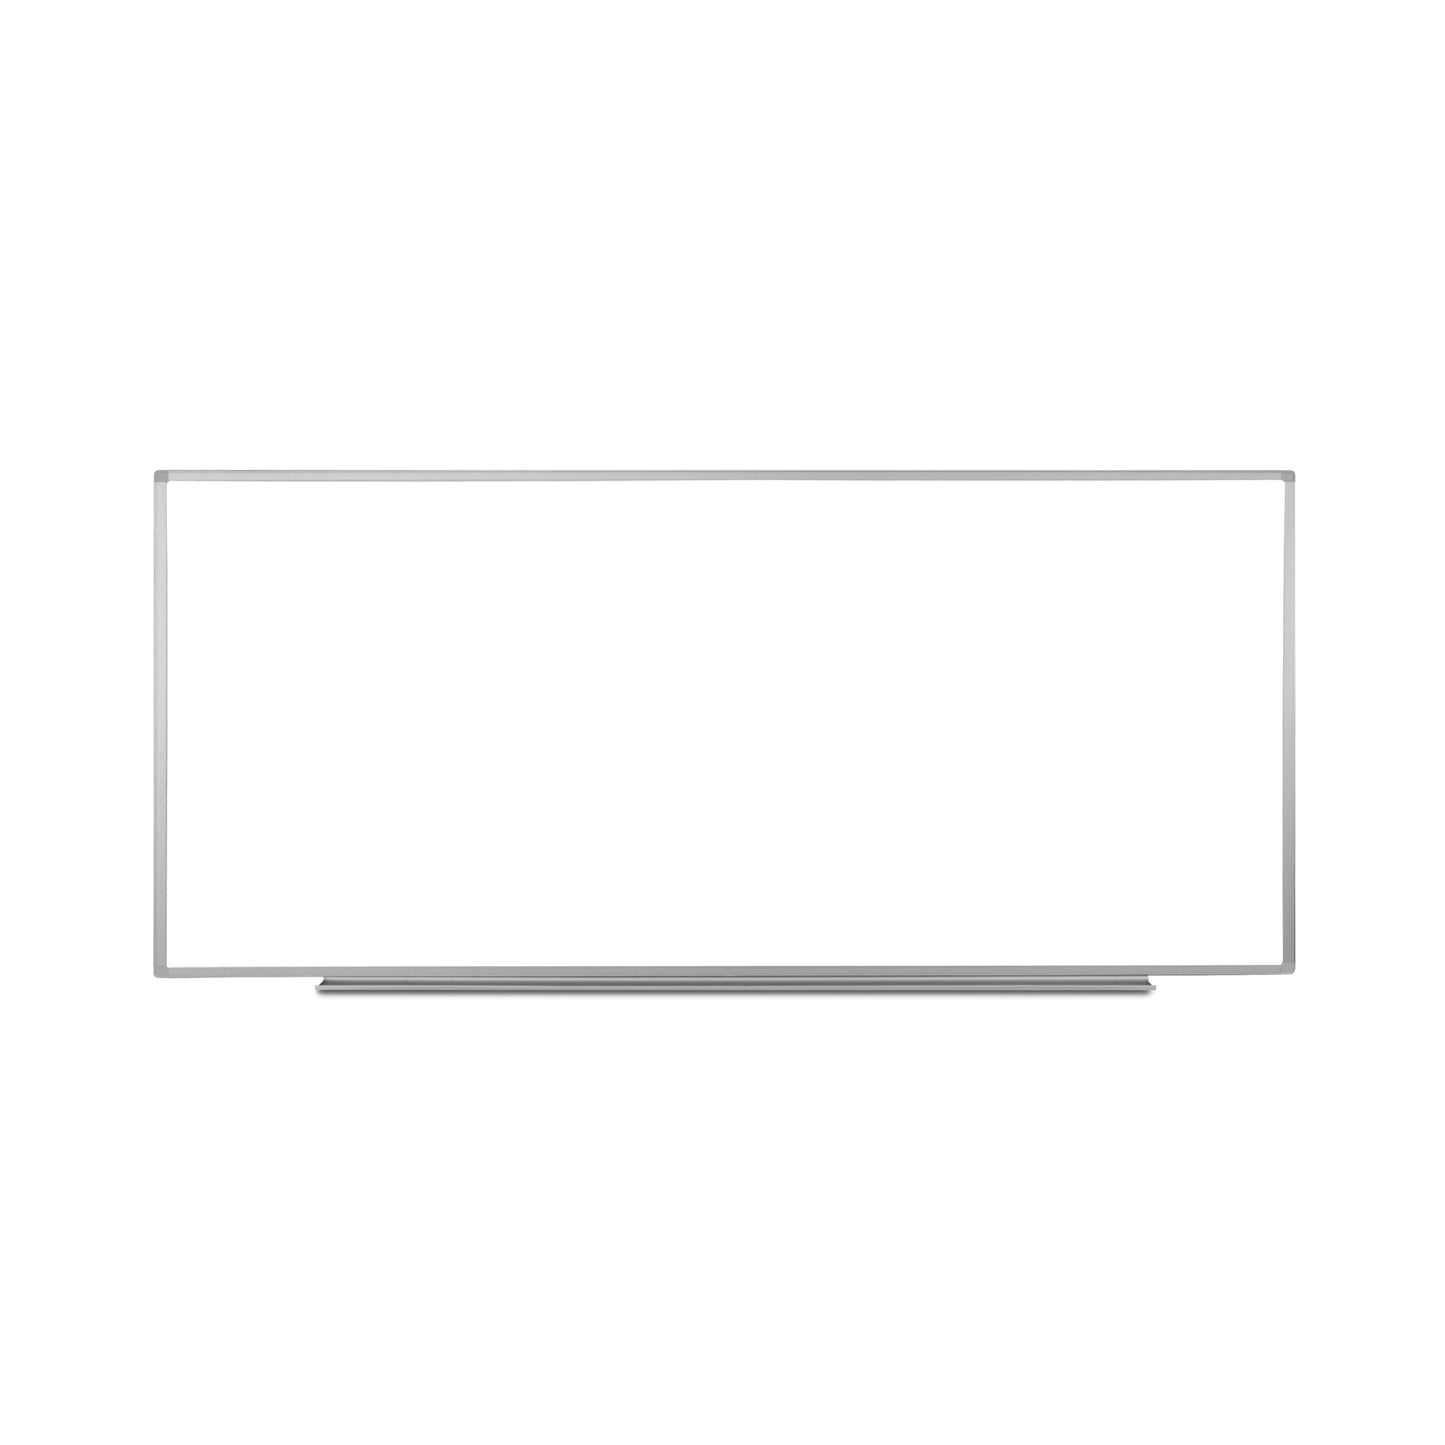 Luxor WB9640W - Wall-mounted Whiteboard 96"W x 40"H (LUX-WB9640W) - SchoolOutlet